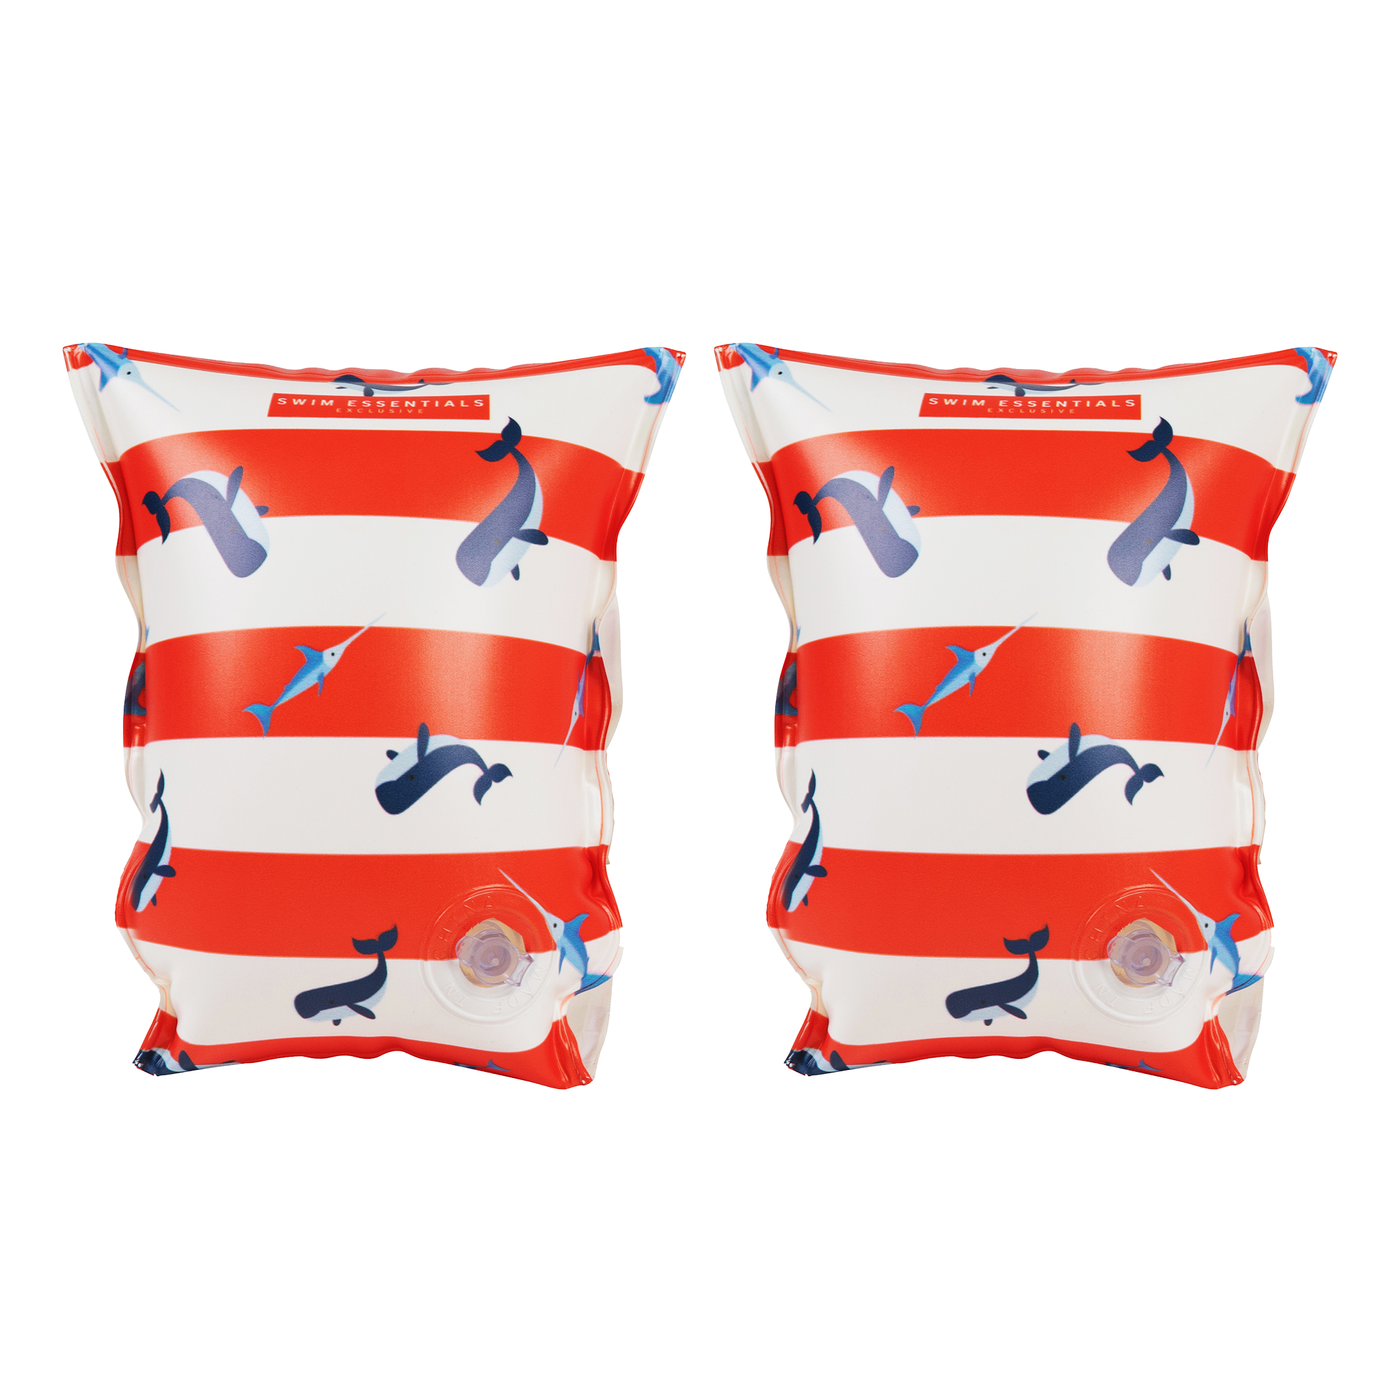 Inflatable armbands 2-6y - multiple prints